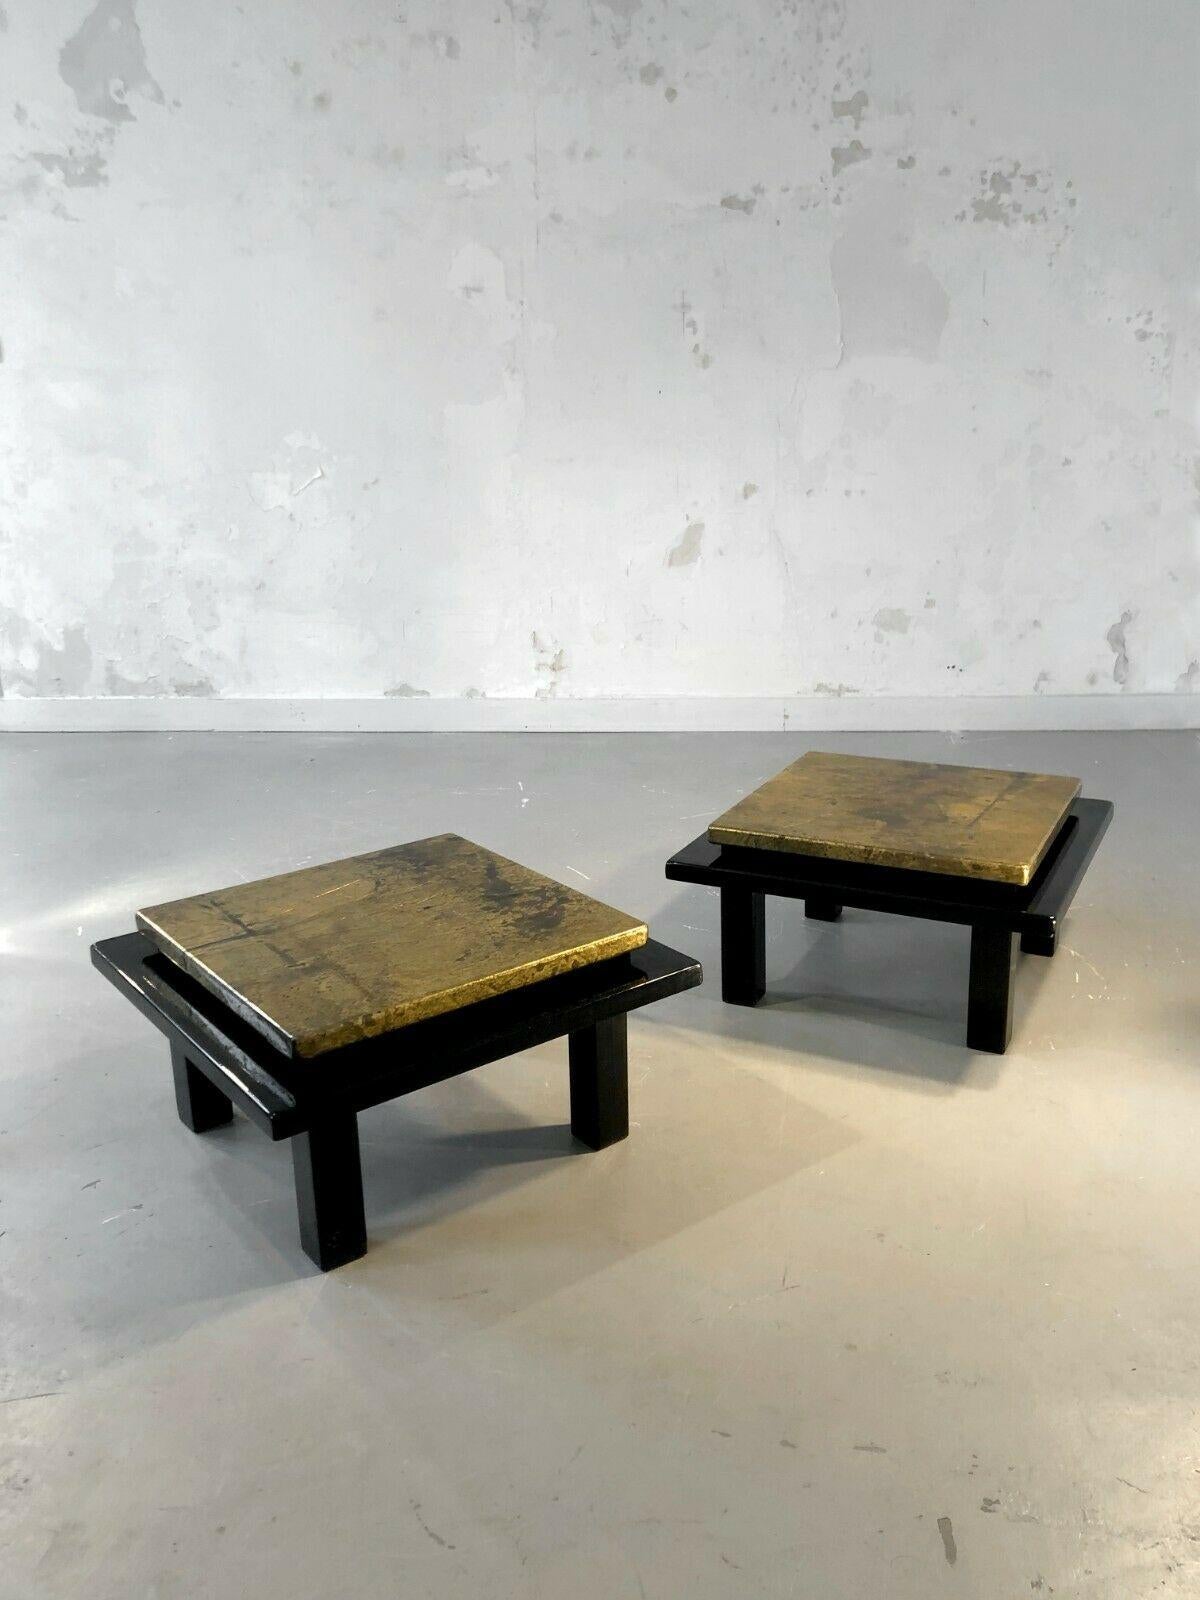 An elegant pair of rectangular nightstands, Art-Déco, Modernist, Cubist, Bauhaus, Shabby-Chic, square constructivist black lacquered wood structures, enhanced with beautiful gold leaf patinated tops, in the spirit of Aldo Tura, 1970.

We also offer